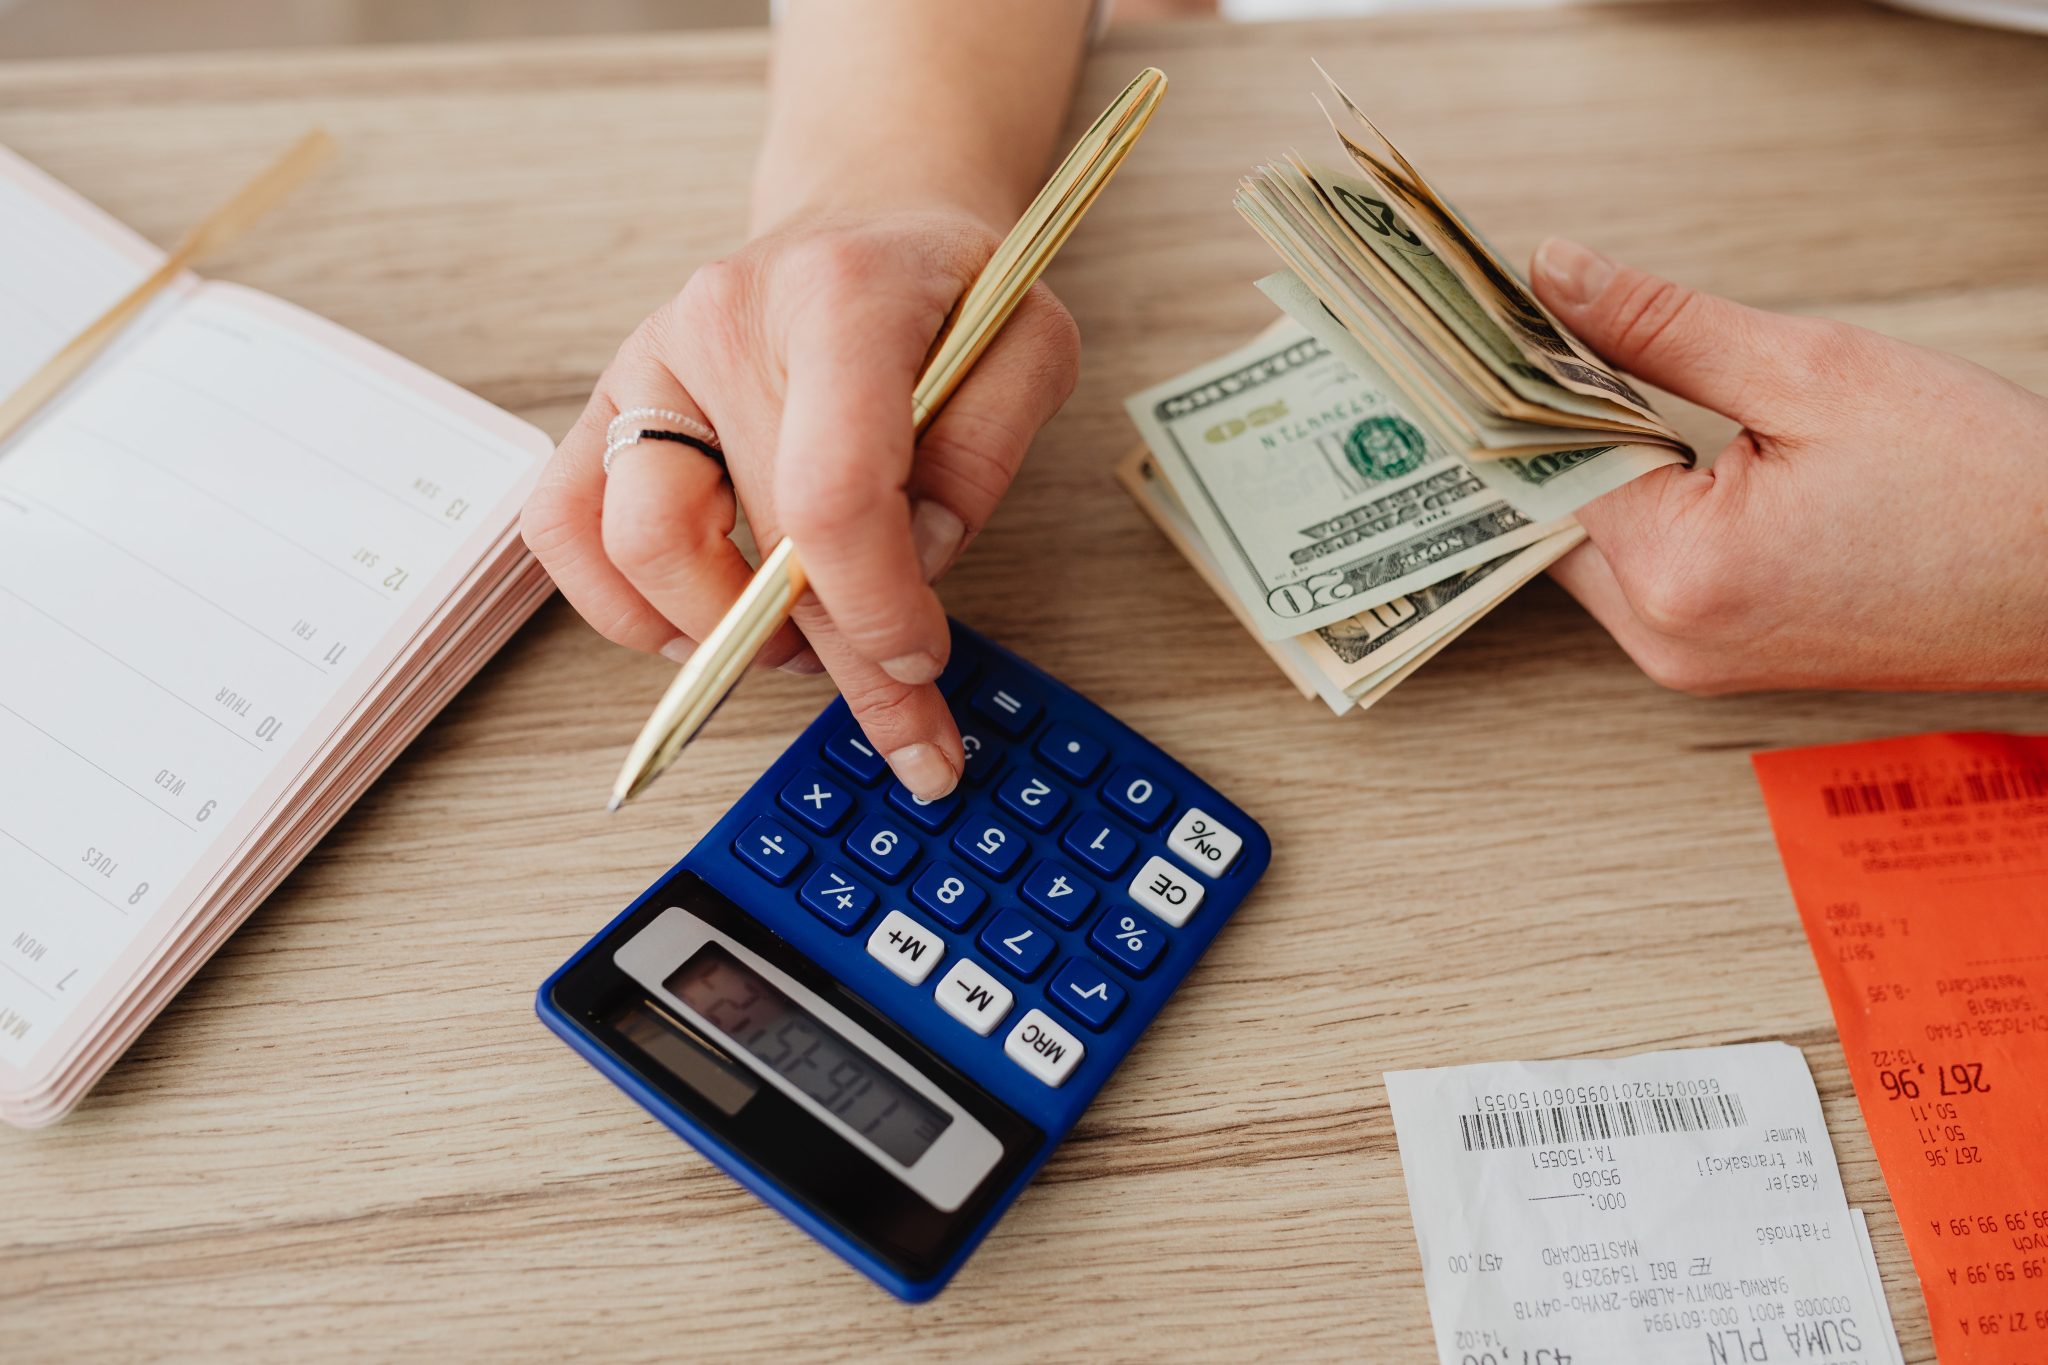 Person holding money in one hand, using a calculator with the other with receipts spread on a table.